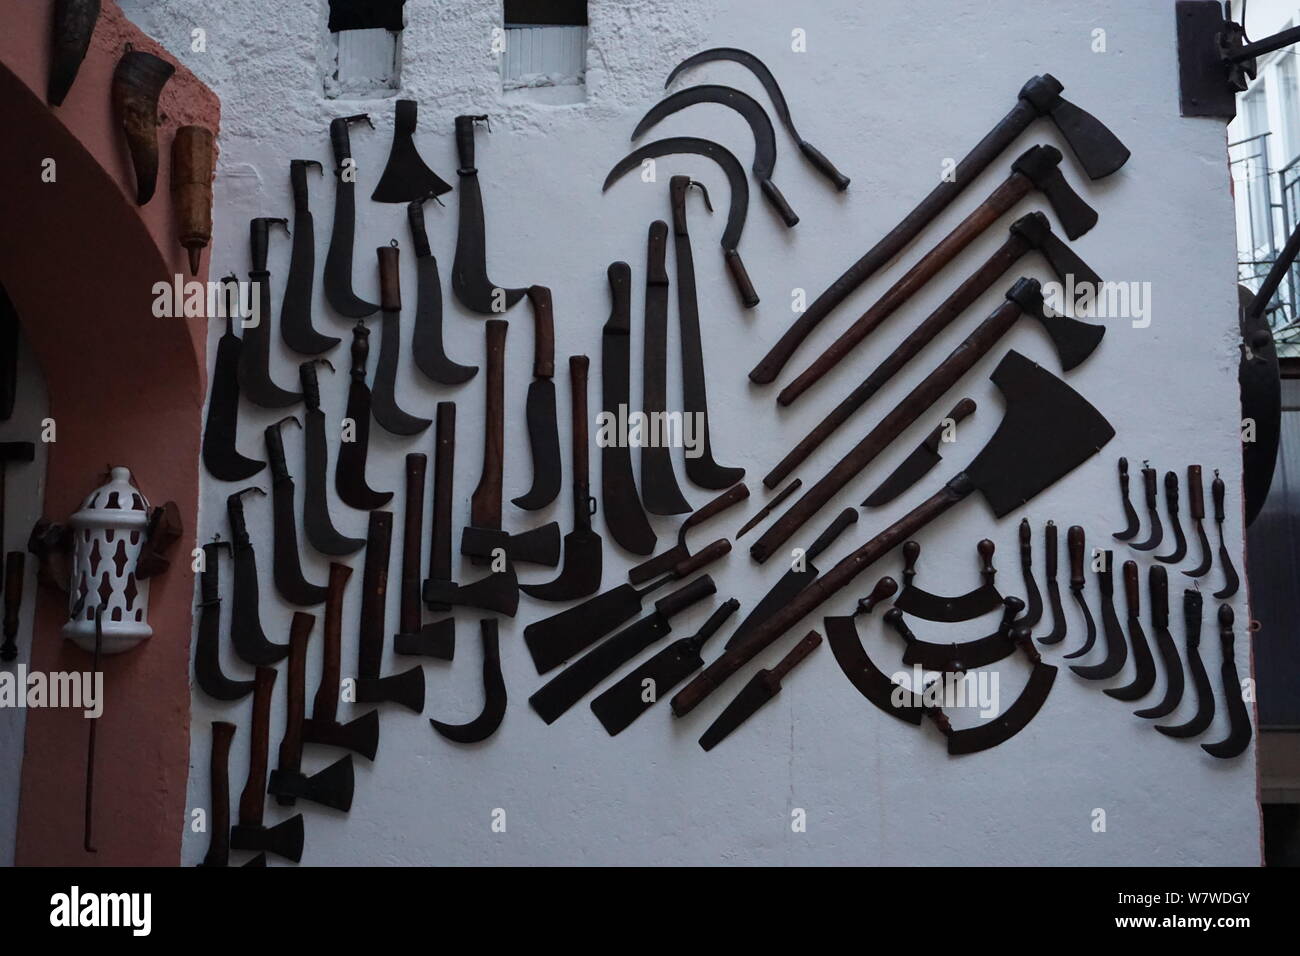 old metal tools diplayed on a white wall as a decoration Stock Photo